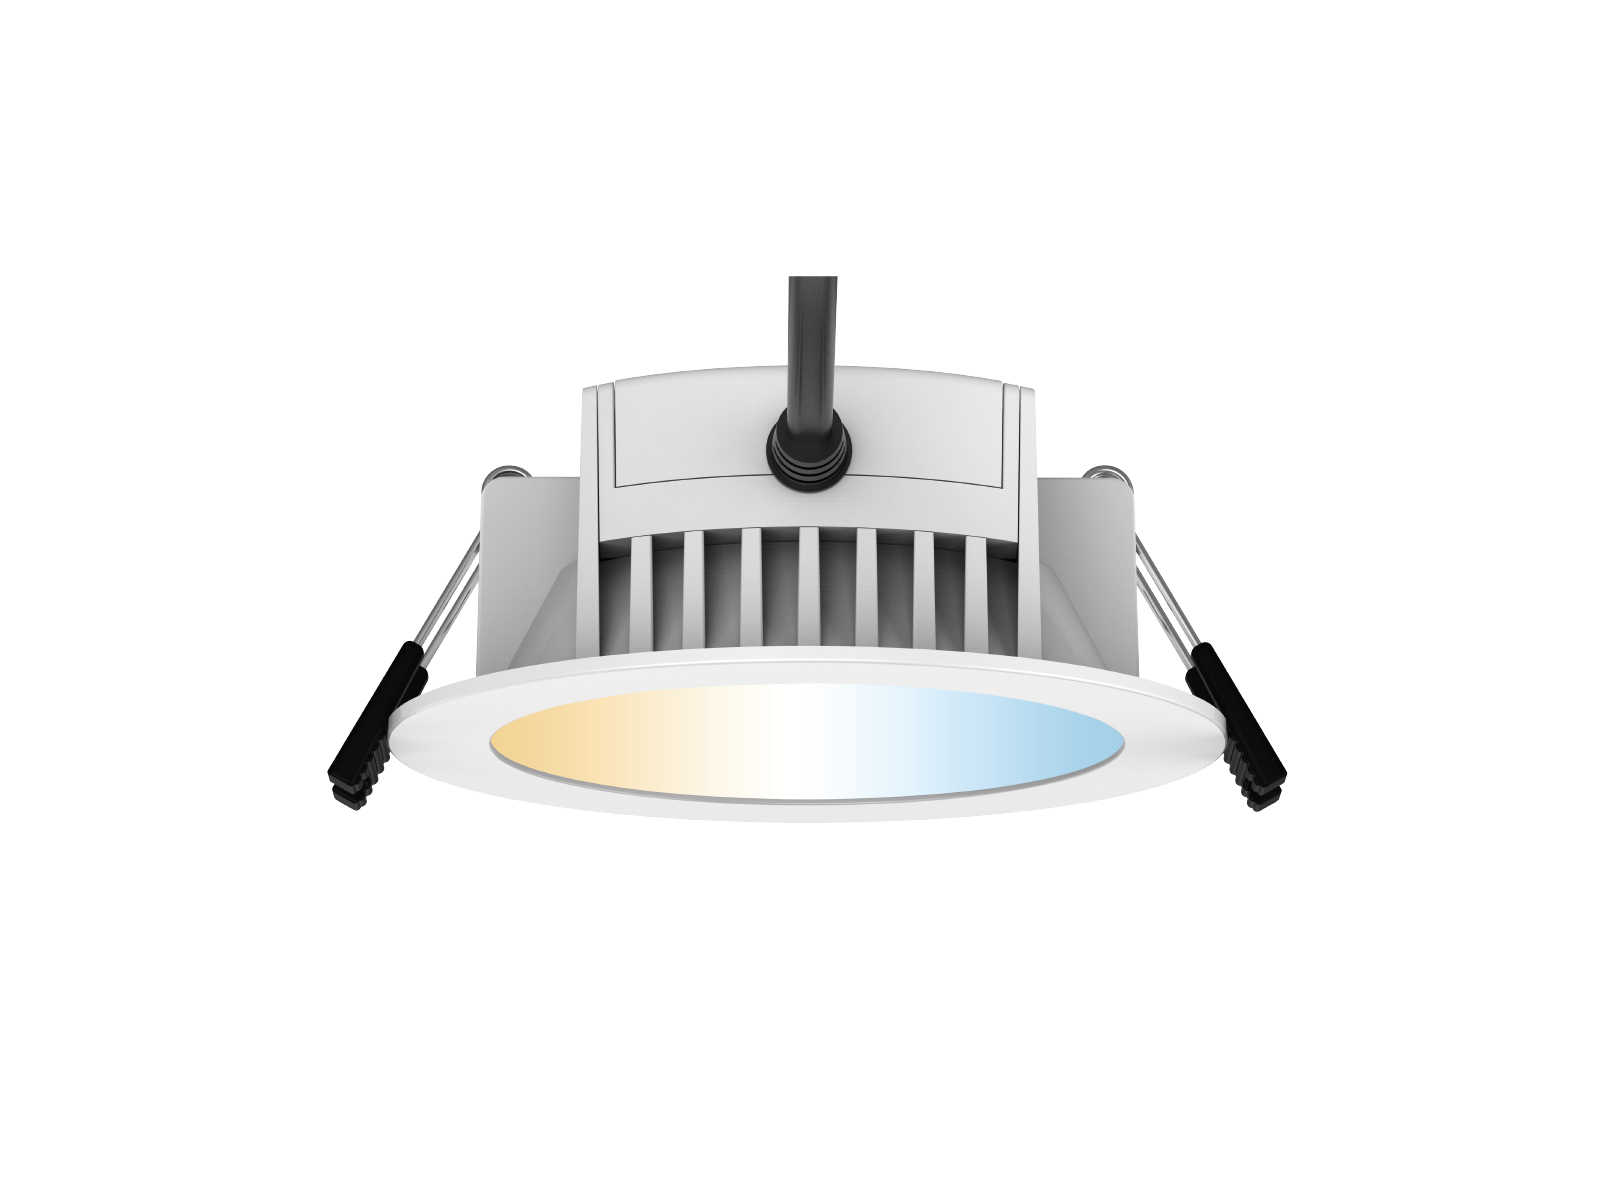 DL260B-W/B High Quality Fire Rated Downlight